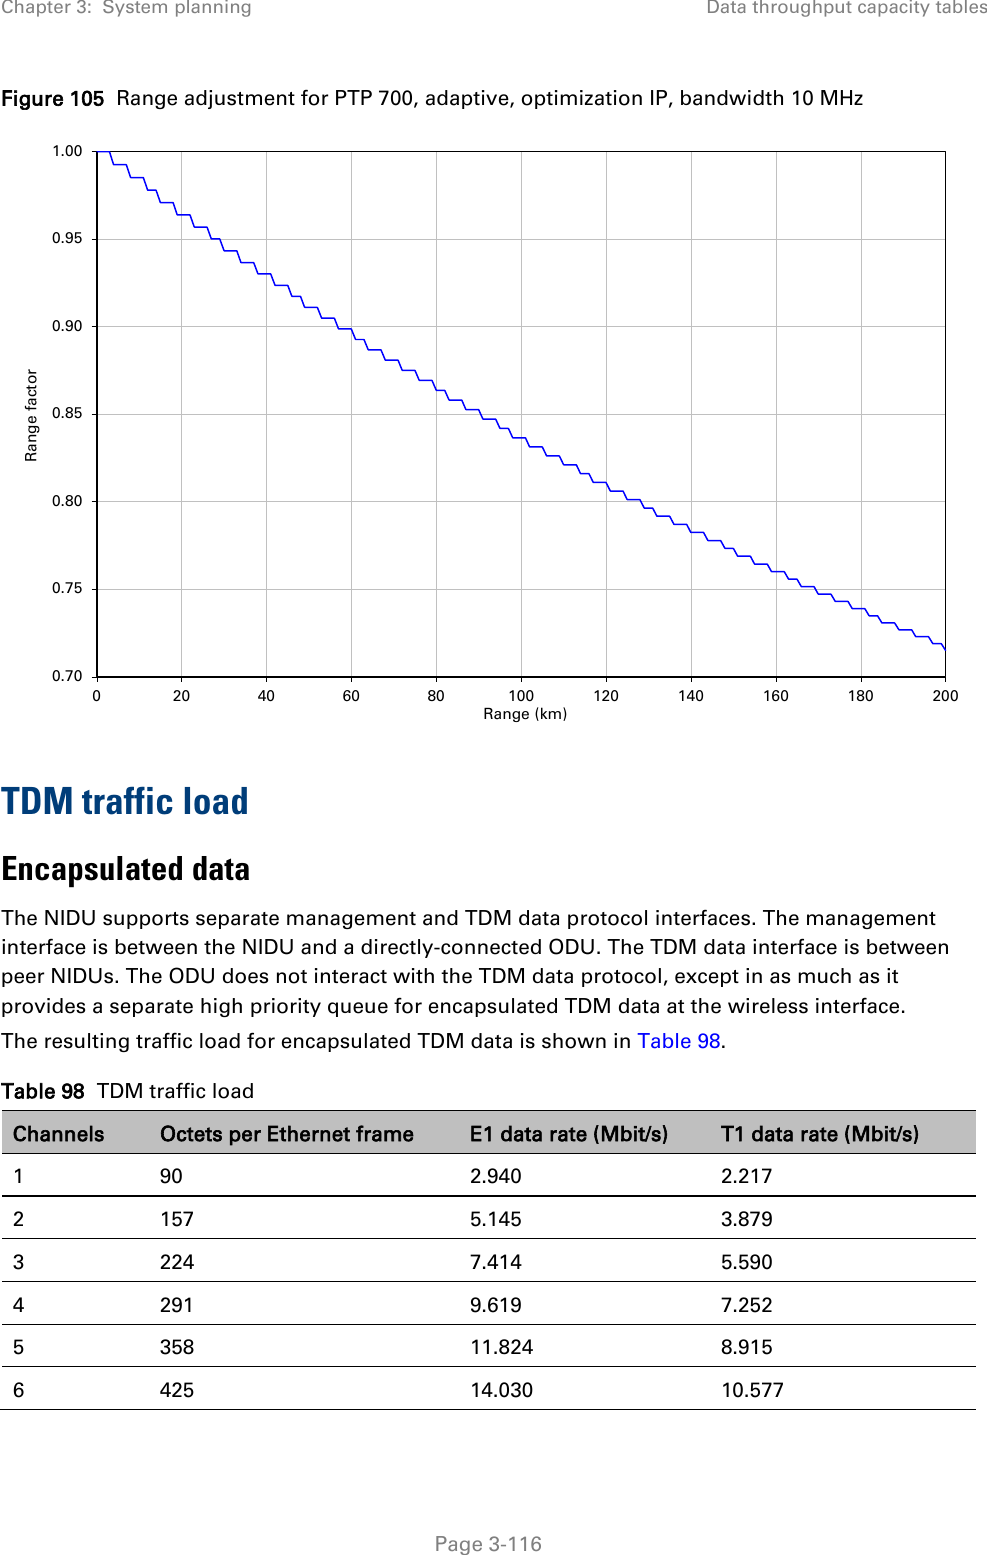 Chapter 3:  System planning Data throughput capacity tables  Figure 105  Range adjustment for PTP 700, adaptive, optimization IP, bandwidth 10 MHz  TDM traffic load Encapsulated data The NIDU supports separate management and TDM data protocol interfaces. The management interface is between the NIDU and a directly-connected ODU. The TDM data interface is between peer NIDUs. The ODU does not interact with the TDM data protocol, except in as much as it provides a separate high priority queue for encapsulated TDM data at the wireless interface. The resulting traffic load for encapsulated TDM data is shown in Table 98. Table 98  TDM traffic load Channels Octets per Ethernet frame E1 data rate (Mbit/s) T1 data rate (Mbit/s) 1  90 2.940 2.217 2  157 5.145 3.879 3  224 7.414 5.590 4  291 9.619 7.252 5  358 11.824 8.915 6  425 14.030 10.577 0.700.750.800.850.900.951.00020 40 60 80 100 120 140 160 180 200Range factorRange (km) Page 3-116 